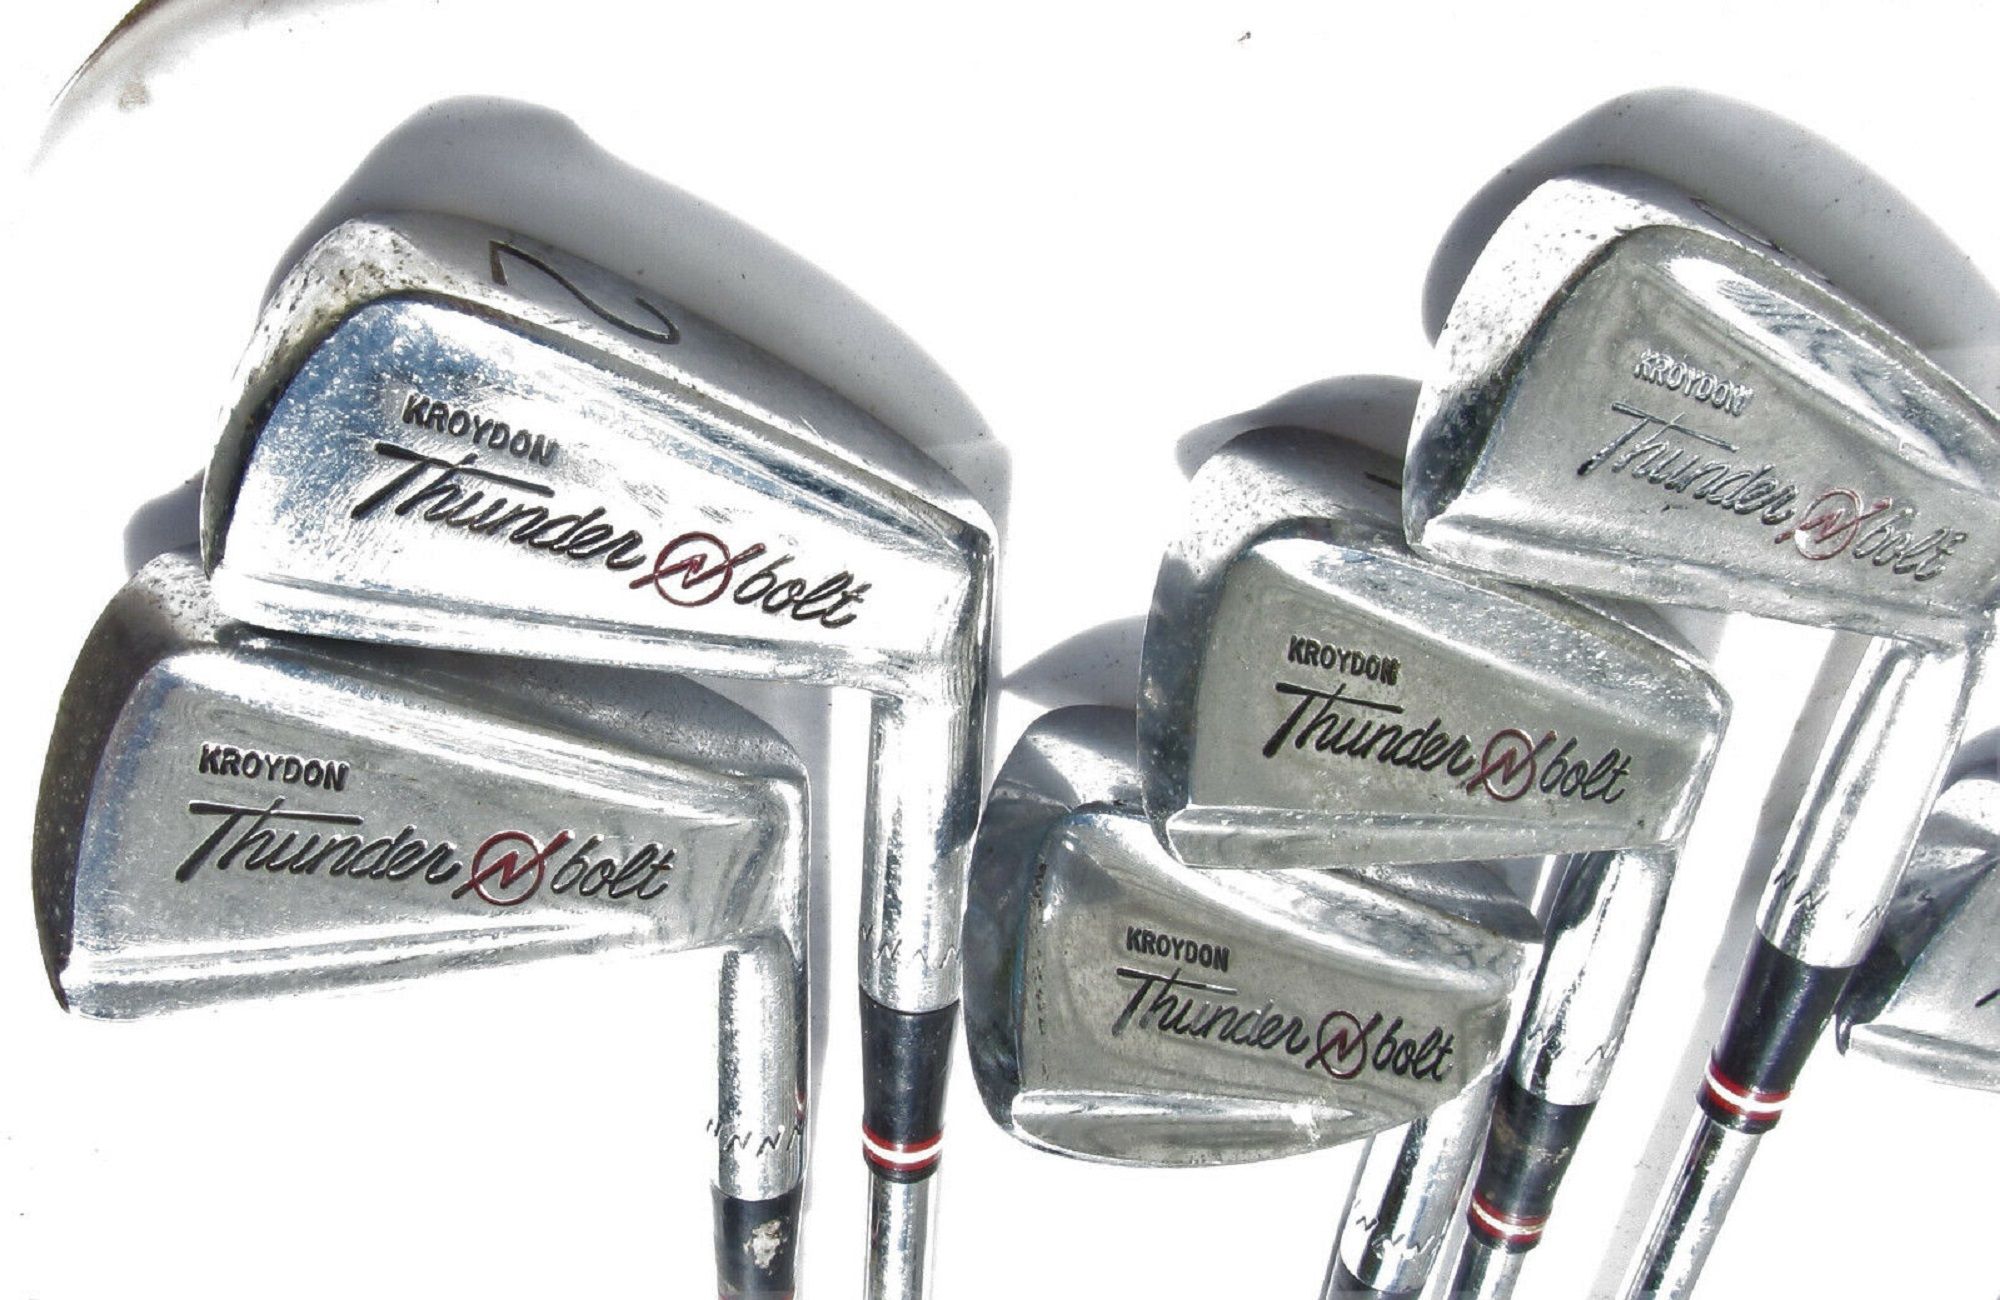 A picture of the Kroydon Thunderbolt Irons made by Ram Golf